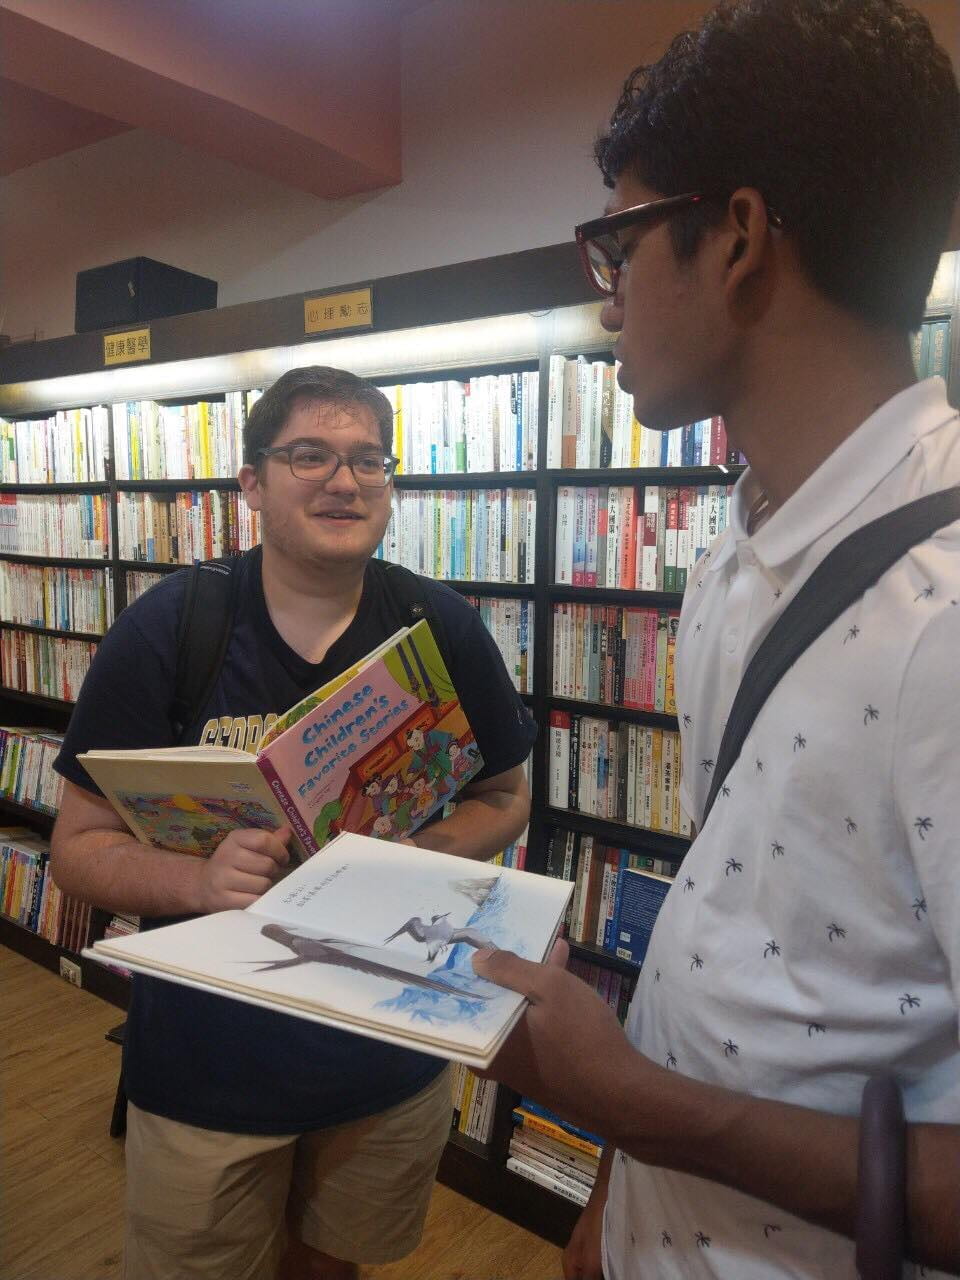 Two Sigur language fellows stand next to each other while holding books in a bookstore